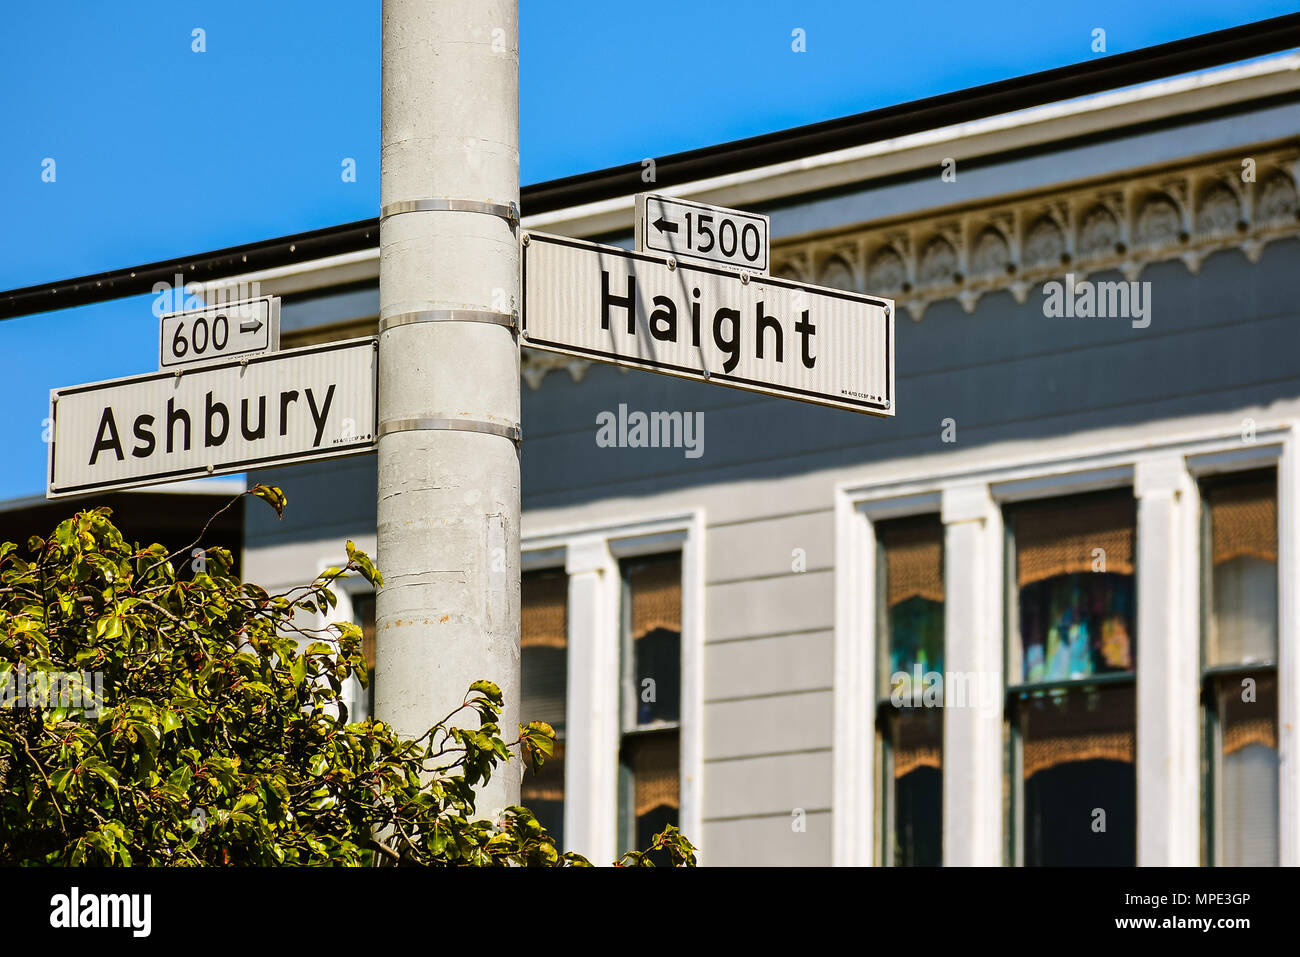 Street signs, corner of Ashbury and Haight in world famous location - San Francisco, California Stock Photo